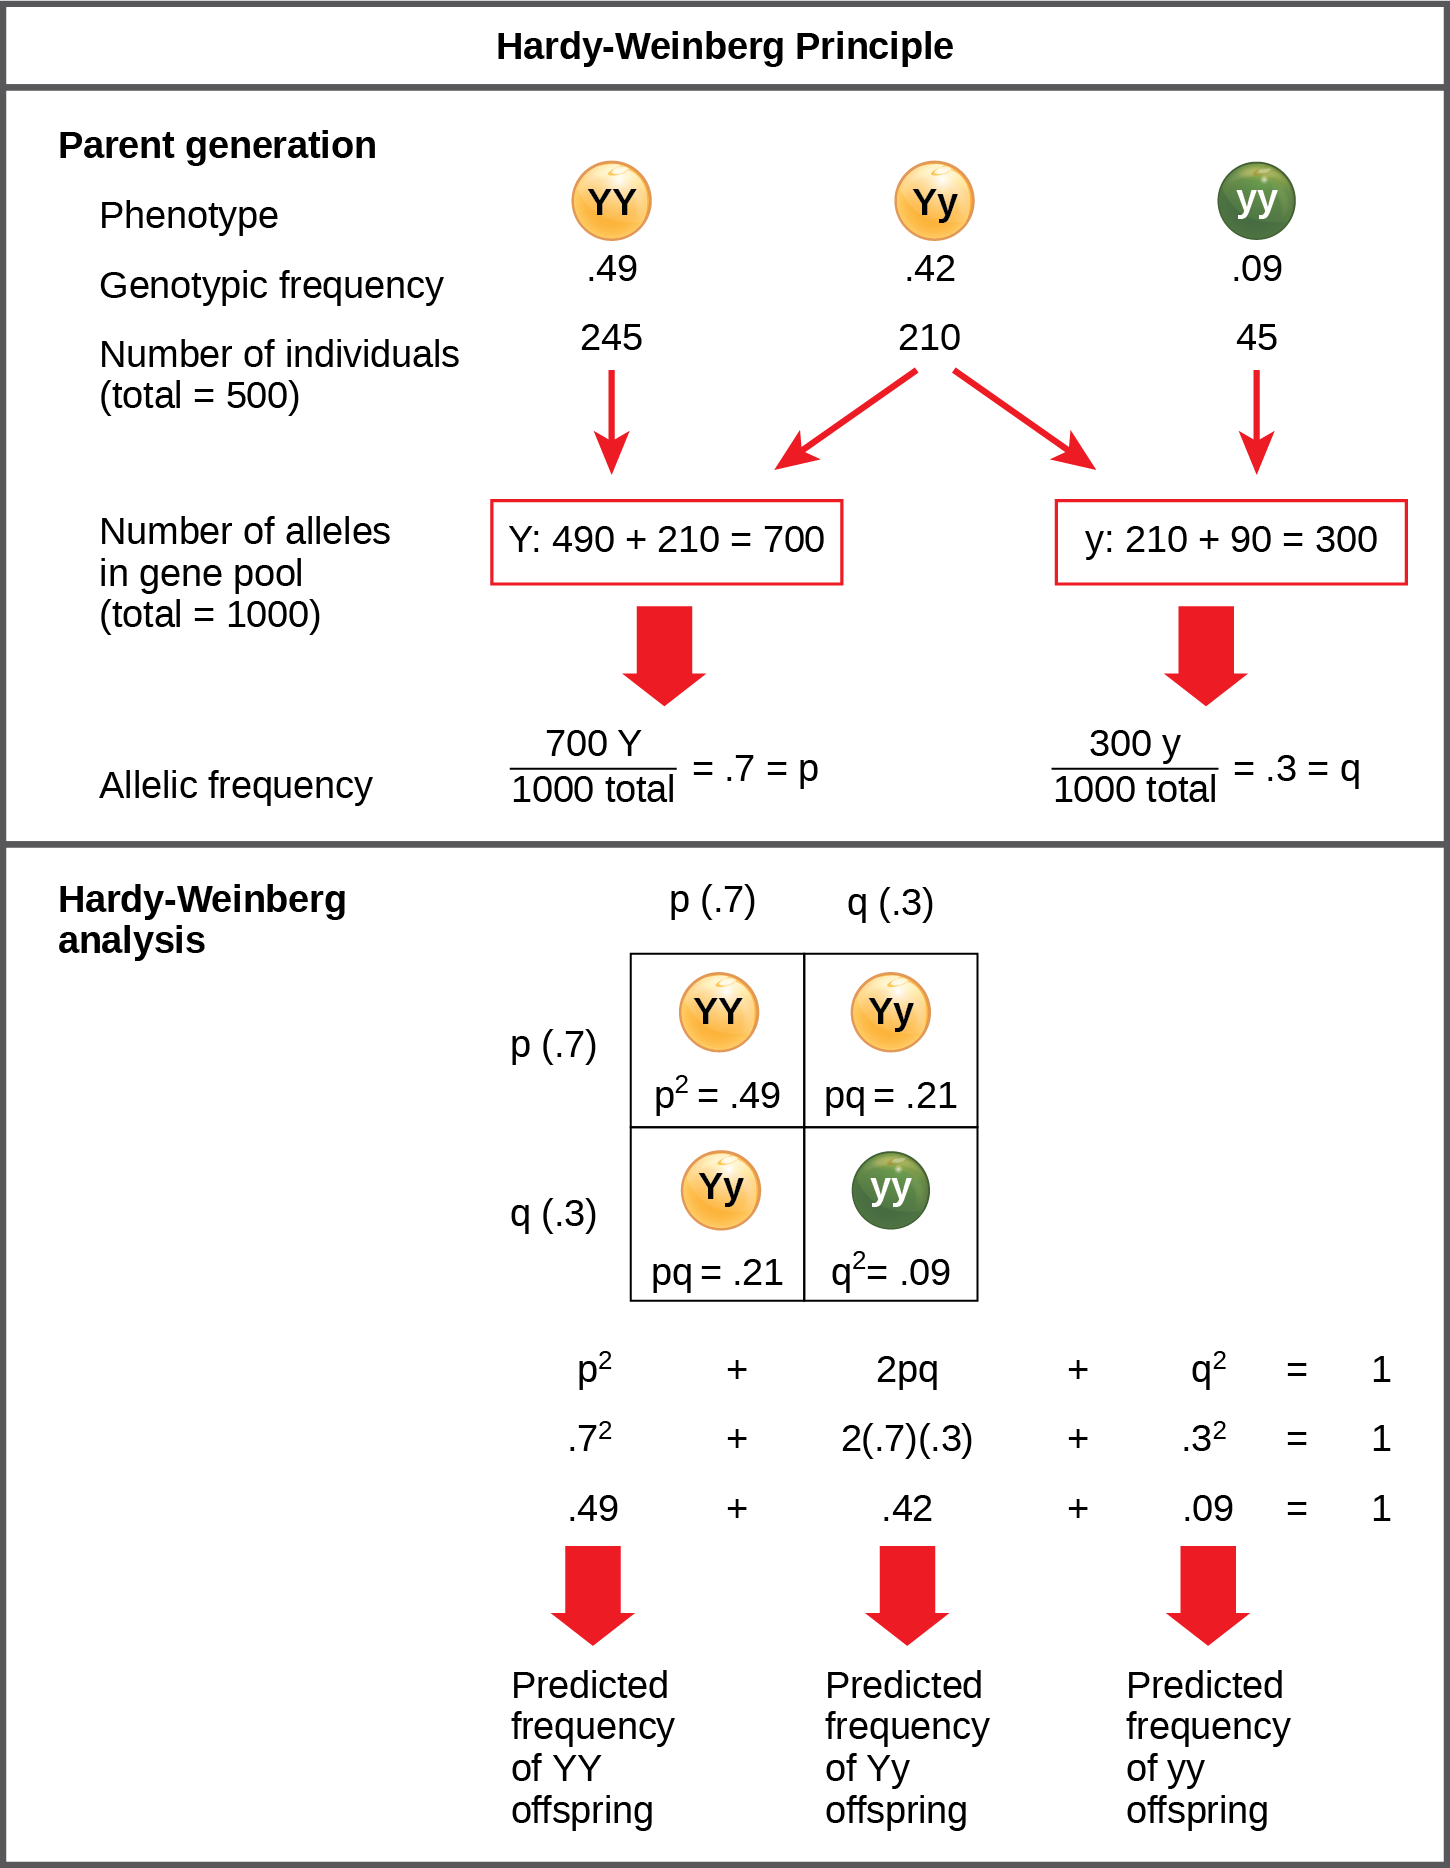 The Hardy-Weinberg principle is used to predict the genotypic distribution of offspring in a given population. In the example given, pea plants have two different alleles for pea color. The dominant capital Y allele results in yellow pea color, and the recessive small y allele results in green pea color. The distribution of individuals in a population of 500 is given. Of the 500 individuals, 245 are homozygous dominant (capital Y capital Y) and produce yellow peas. 210 are heterozygous (capital Y small y) and also produce yellow peas. 45 are homozygous recessive (small y small y) and produce green peas. The frequencies of homozygous dominant, heterozygous, and homozygous recessive individuals are 0.49, 0.42, and 0.09, respectively. Each of the 500 individuals provides two alleles to the gene pool, or 1000 total. The 245 homozygous dominant individuals provide two capital Y alleles to the gene pool, or 490 total. The 210 heterozygous individuals provide 210 capital Y and 210 small y alleles to the gene pool. The 45 homozygous recessive individuals provide two small y alleles to the gene pool, or 90 total. The number of capital Y alleles is 490 from homozygous dominant individuals plus 210 from homozygous recessive individuals, or 700 total. The number of small y alleles is 210 from heterozygous individuals plus 90 from homozygous recessive individuals, or 300 total. The allelic frequency is calculated by dividing the number of each allele by the total number of alleles in the gene pool. For the capital Y allele, the allelic frequency is 700 divided by 1000, or 0.7; this allelic frequency is called p. For the small y allele the allelic frequency is 300 divided by 1000, or 0.3; the allelic frequency is called q. Hardy-Weinberg analysis is used to determine the genotypic frequency in the offspring. The Hardy-Wienberg equation is p-squared plus 2pq plus q-squared equals 1. For the population given, the frequency is 0.7-squared plus 2 times .7 times .3 plus .3-squared equals one. The value for p-squared, 0.49, is the predicted frequency of homozygous dominant (capital Y capital Y) individuals. The value for 2pq, 0.42, is the predicted frequency of heterozygous (capital Y small y) individuals. The value for q-squared, .09, is the predicted frequency of homozygous recessive individuals. Note that the predicted frequency of genotypes in the offspring is the same as the frequency of genotypes in the parent population. If all the genotypic frequencies, .49 plus .42 plus .09, are added together, the result is one